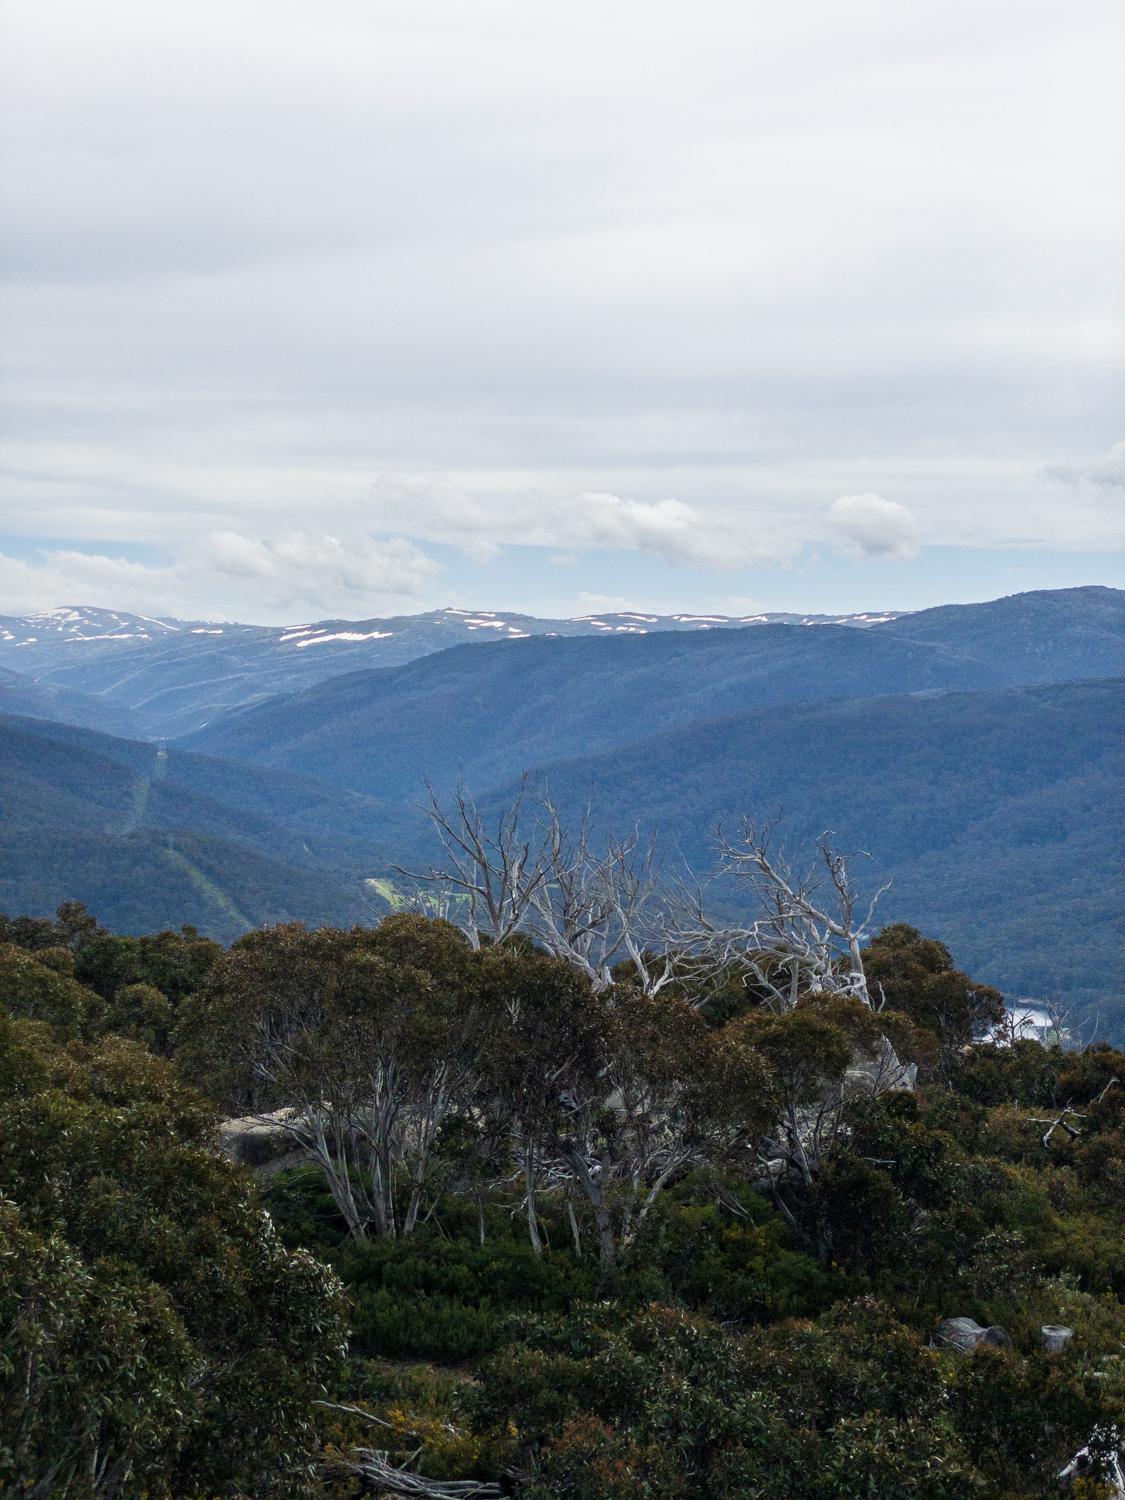 A weekend running in the Snowy Mountains